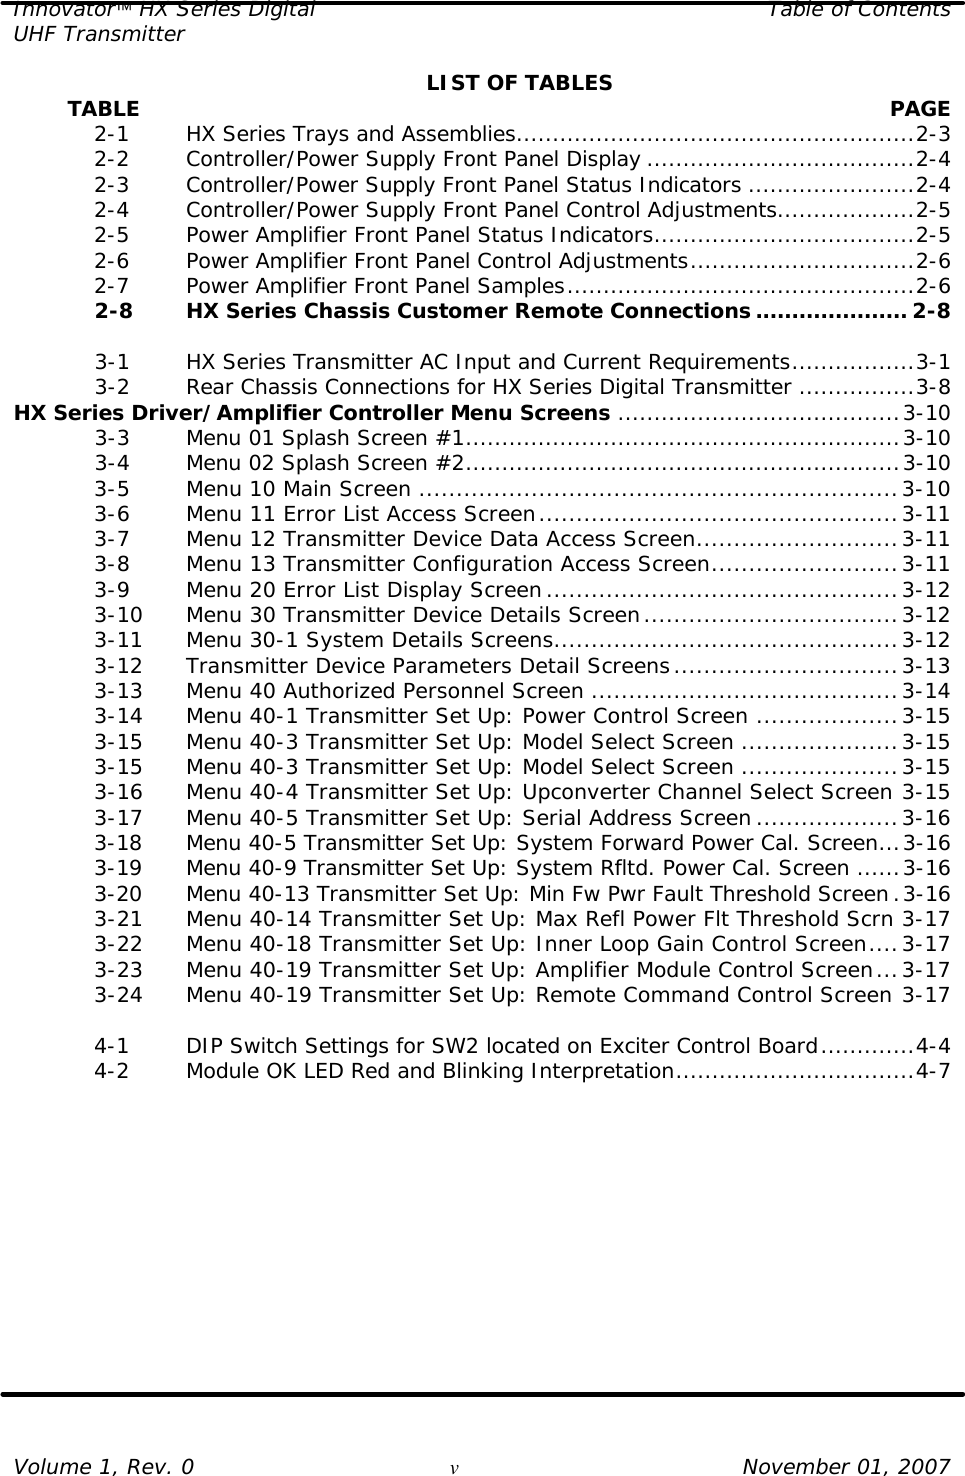 Innovator HX Series Digital Table of Contents UHF Transmitter  Volume 1, Rev. 0 v November 01, 2007 LIST OF TABLES         TABLE  PAGE  2-1   HX Series Trays and Assemblies.......................................................2-3  2-2   Controller/Power Supply Front Panel Display .....................................2-4  2-3   Controller/Power Supply Front Panel Status Indicators .......................2-4  2-4   Controller/Power Supply Front Panel Control Adjustments...................2-5  2-5   Power Amplifier Front Panel Status Indicators....................................2-5  2-6   Power Amplifier Front Panel Control Adjustments...............................2-6  2-7   Power Amplifier Front Panel Samples................................................2-6  2-8   HX Series Chassis Customer Remote Connections ..................... 2-8   3-1   HX Series Transmitter AC Input and Current Requirements.................3-1  3-2   Rear Chassis Connections for HX Series Digital Transmitter ................3-8 HX Series Driver/Amplifier Controller Menu Screens .......................................3-10  3-3   Menu 01 Splash Screen #1............................................................3-10  3-4   Menu 02 Splash Screen #2............................................................3-10  3-5   Menu 10 Main Screen ................................................................3-10  3-6   Menu 11 Error List Access Screen................................................3-11  3-7   Menu 12 Transmitter Device Data Access Screen...........................3-11  3-8   Menu 13 Transmitter Configuration Access Screen.........................3-11  3-9   Menu 20 Error List Display Screen...............................................3-12  3-10 Menu 30 Transmitter Device Details Screen..................................3-12  3-11 Menu 30-1 System Details Screens..............................................3-12  3-12 Transmitter Device Parameters Detail Screens..............................3-13  3-13 Menu 40 Authorized Personnel Screen .........................................3-14  3-14 Menu 40-1 Transmitter Set Up: Power Control Screen ...................3-15  3-15 Menu 40-3 Transmitter Set Up: Model Select Screen .....................3-15  3-15 Menu 40-3 Transmitter Set Up: Model Select Screen .....................3-15  3-16 Menu 40-4 Transmitter Set Up: Upconverter Channel Select Screen 3-15  3-17 Menu 40-5 Transmitter Set Up: Serial Address Screen ...................3-16  3-18 Menu 40-5 Transmitter Set Up: System Forward Power Cal. Screen...3-16  3-19 Menu 40-9 Transmitter Set Up: System Rfltd. Power Cal. Screen ......3-16  3-20 Menu 40-13 Transmitter Set Up: Min Fw Pwr Fault Threshold Screen.3-16  3-21 Menu 40-14 Transmitter Set Up: Max Refl Power Flt Threshold Scrn 3-17  3-22 Menu 40-18 Transmitter Set Up: Inner Loop Gain Control Screen....3-17  3-23 Menu 40-19 Transmitter Set Up: Amplifier Module Control Screen...3-17  3-24 Menu 40-19 Transmitter Set Up: Remote Command Control Screen 3-17   4-1   DIP Switch Settings for SW2 located on Exciter Control Board.............4-4  4-2   Module OK LED Red and Blinking Interpretation.................................4-7   